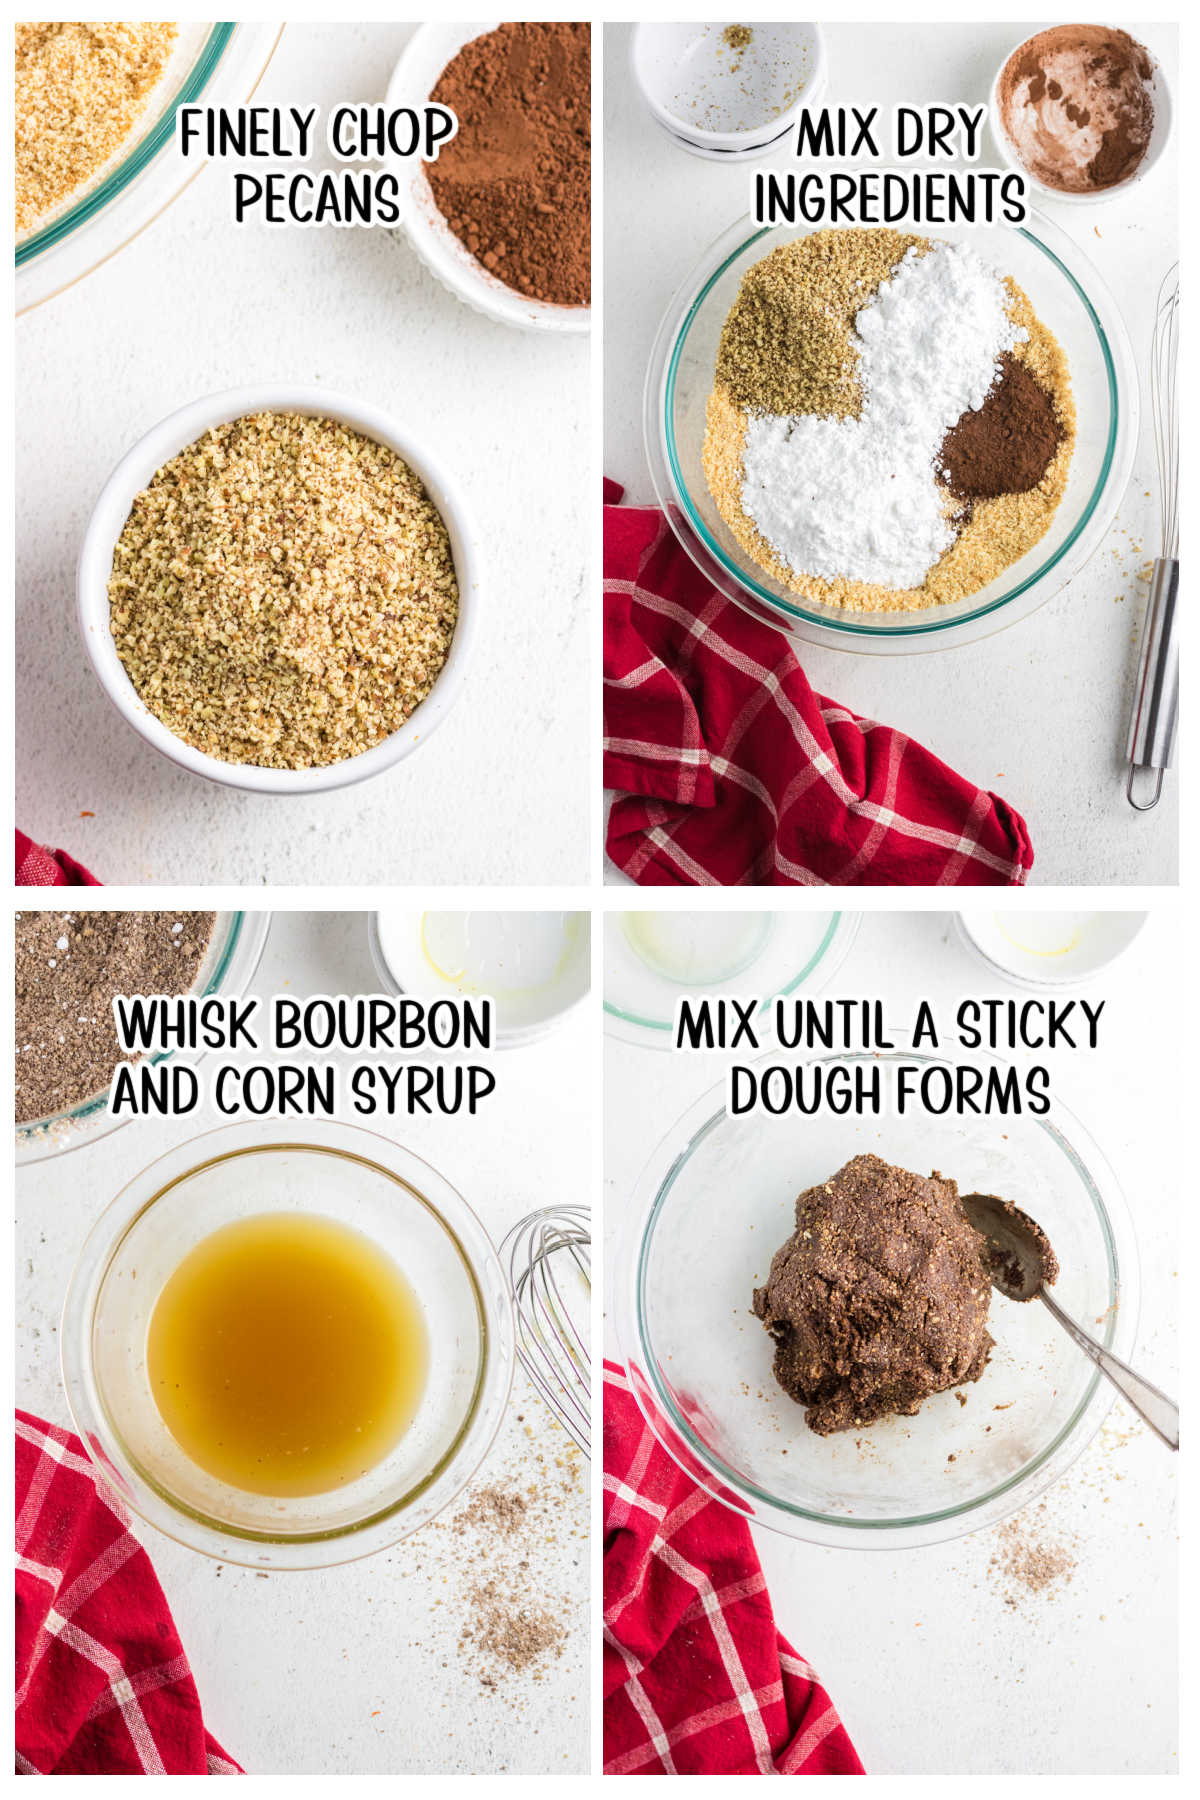 Step by step images showing how to make bourbon balls.